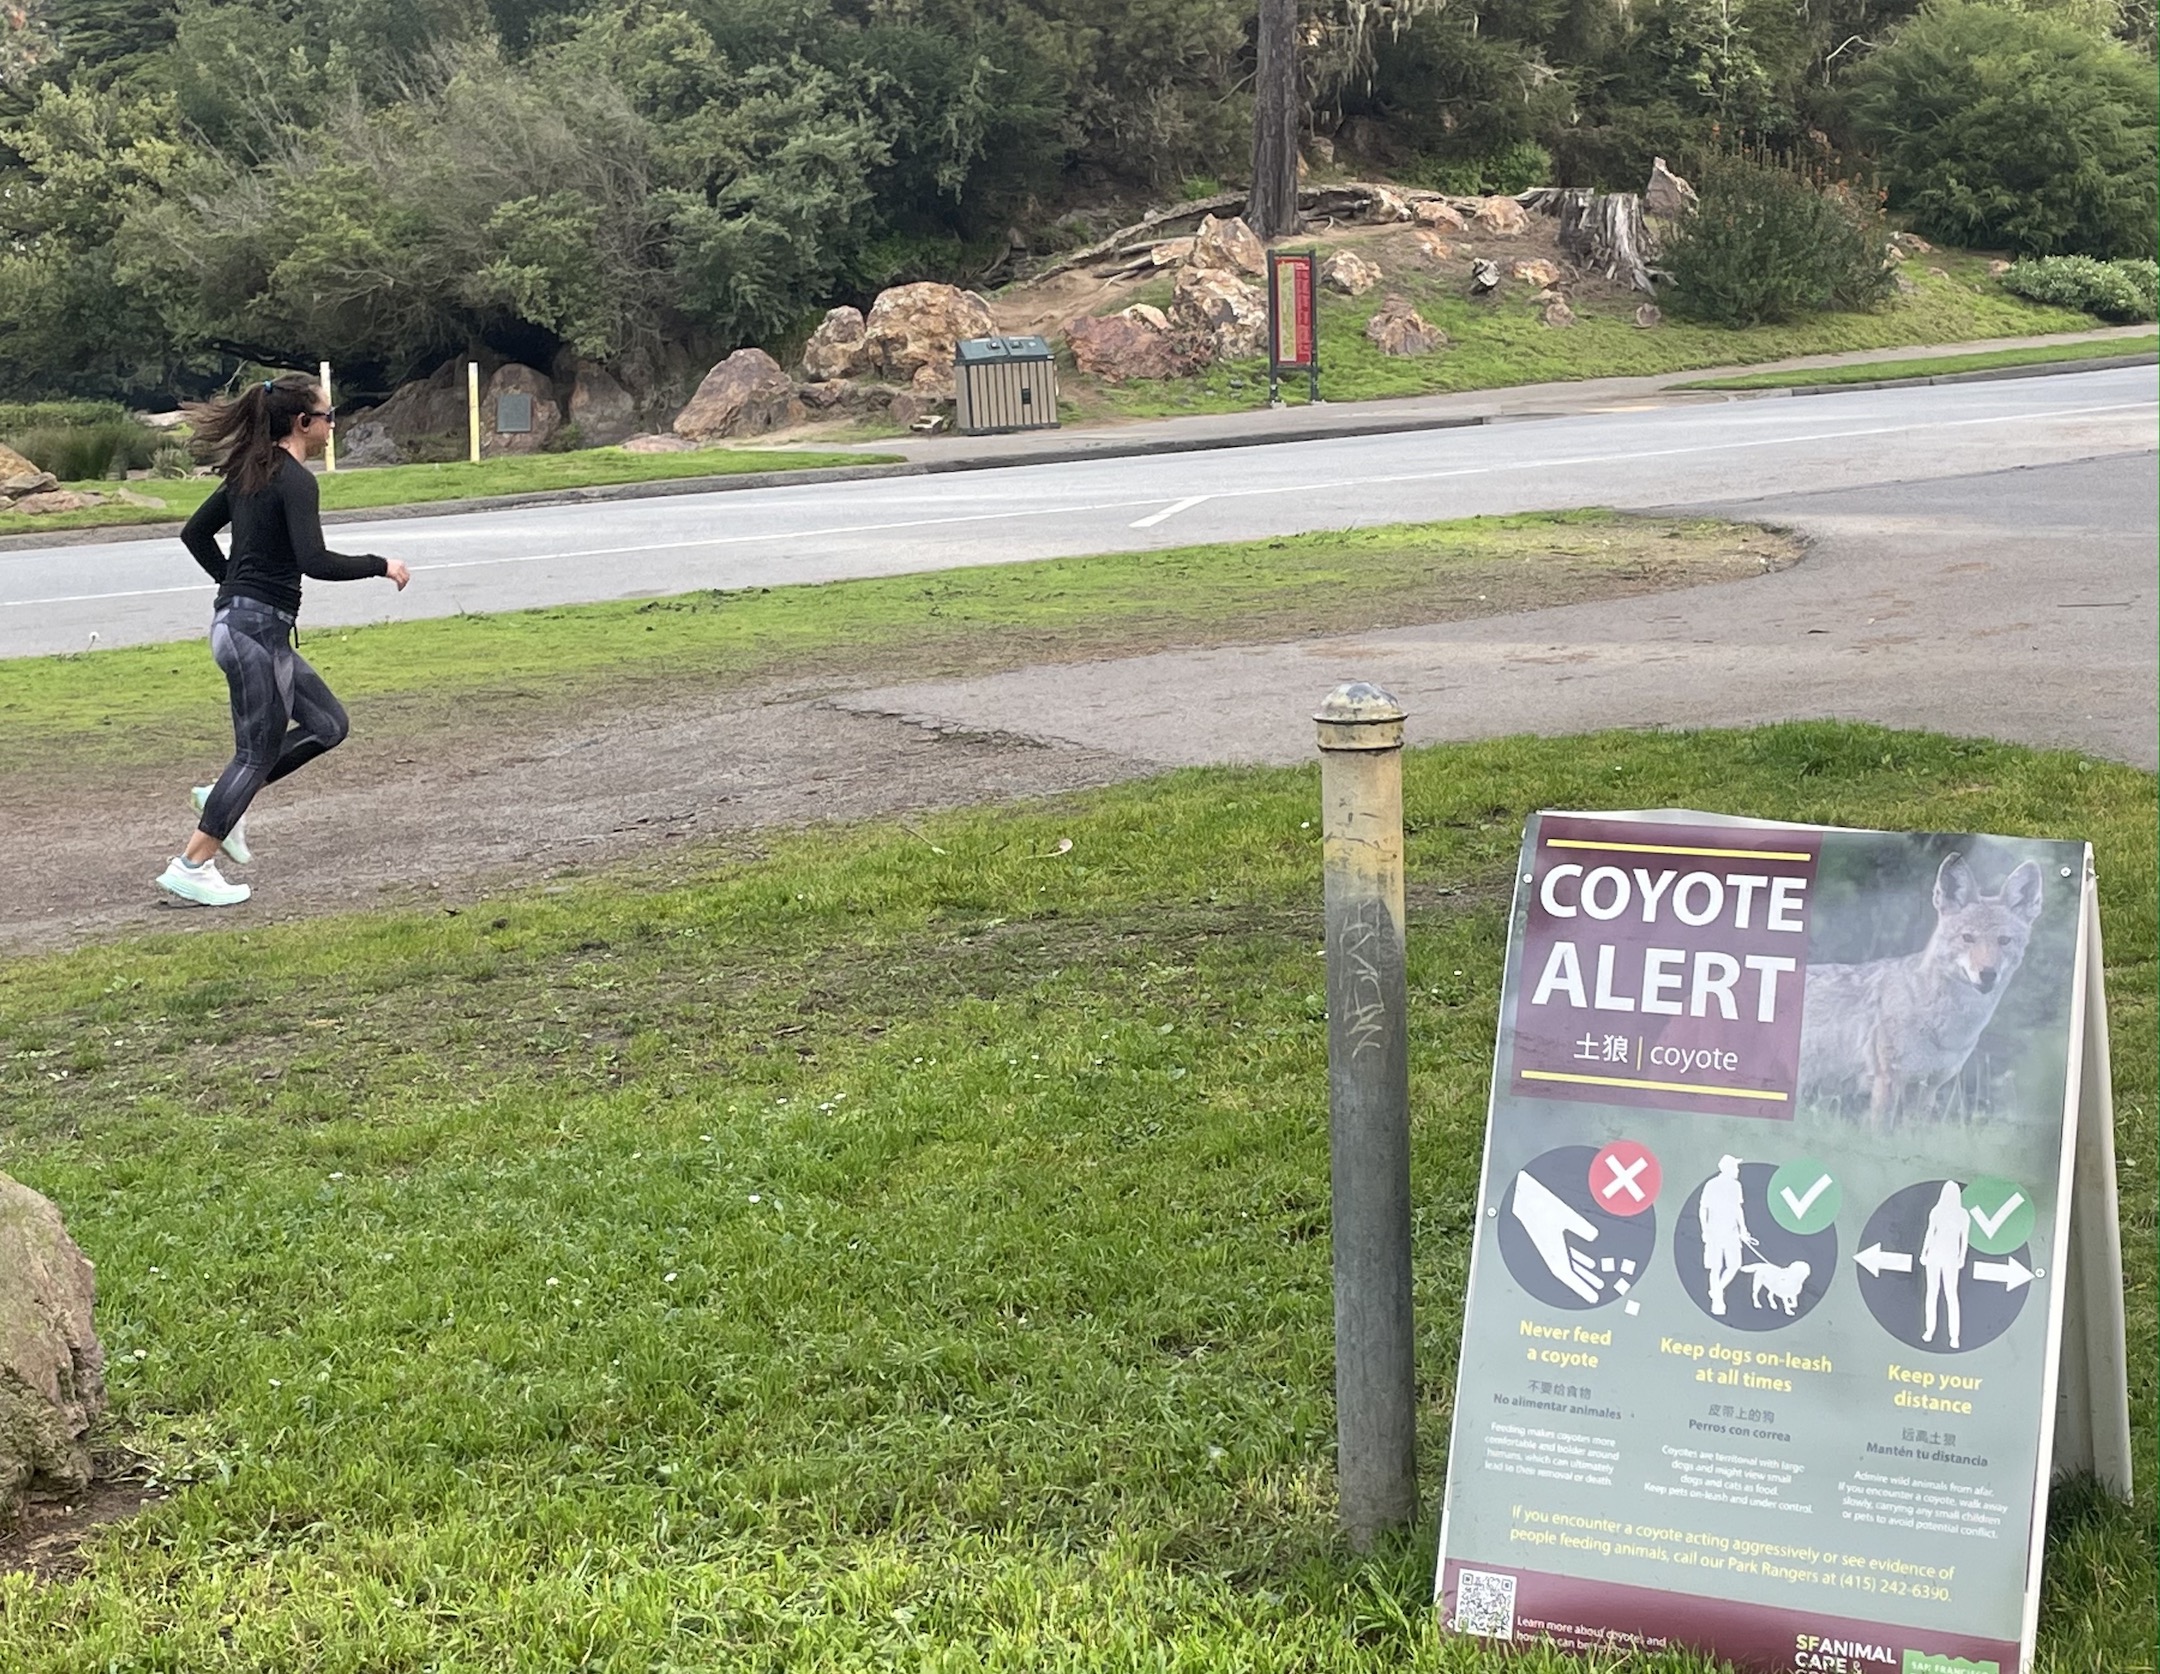 A jogger runs on an urban trail. In the foreground is a sign that reads, "Coyote Alert: Never feed a coyote. Keep dogs on leash. Keep your distance."